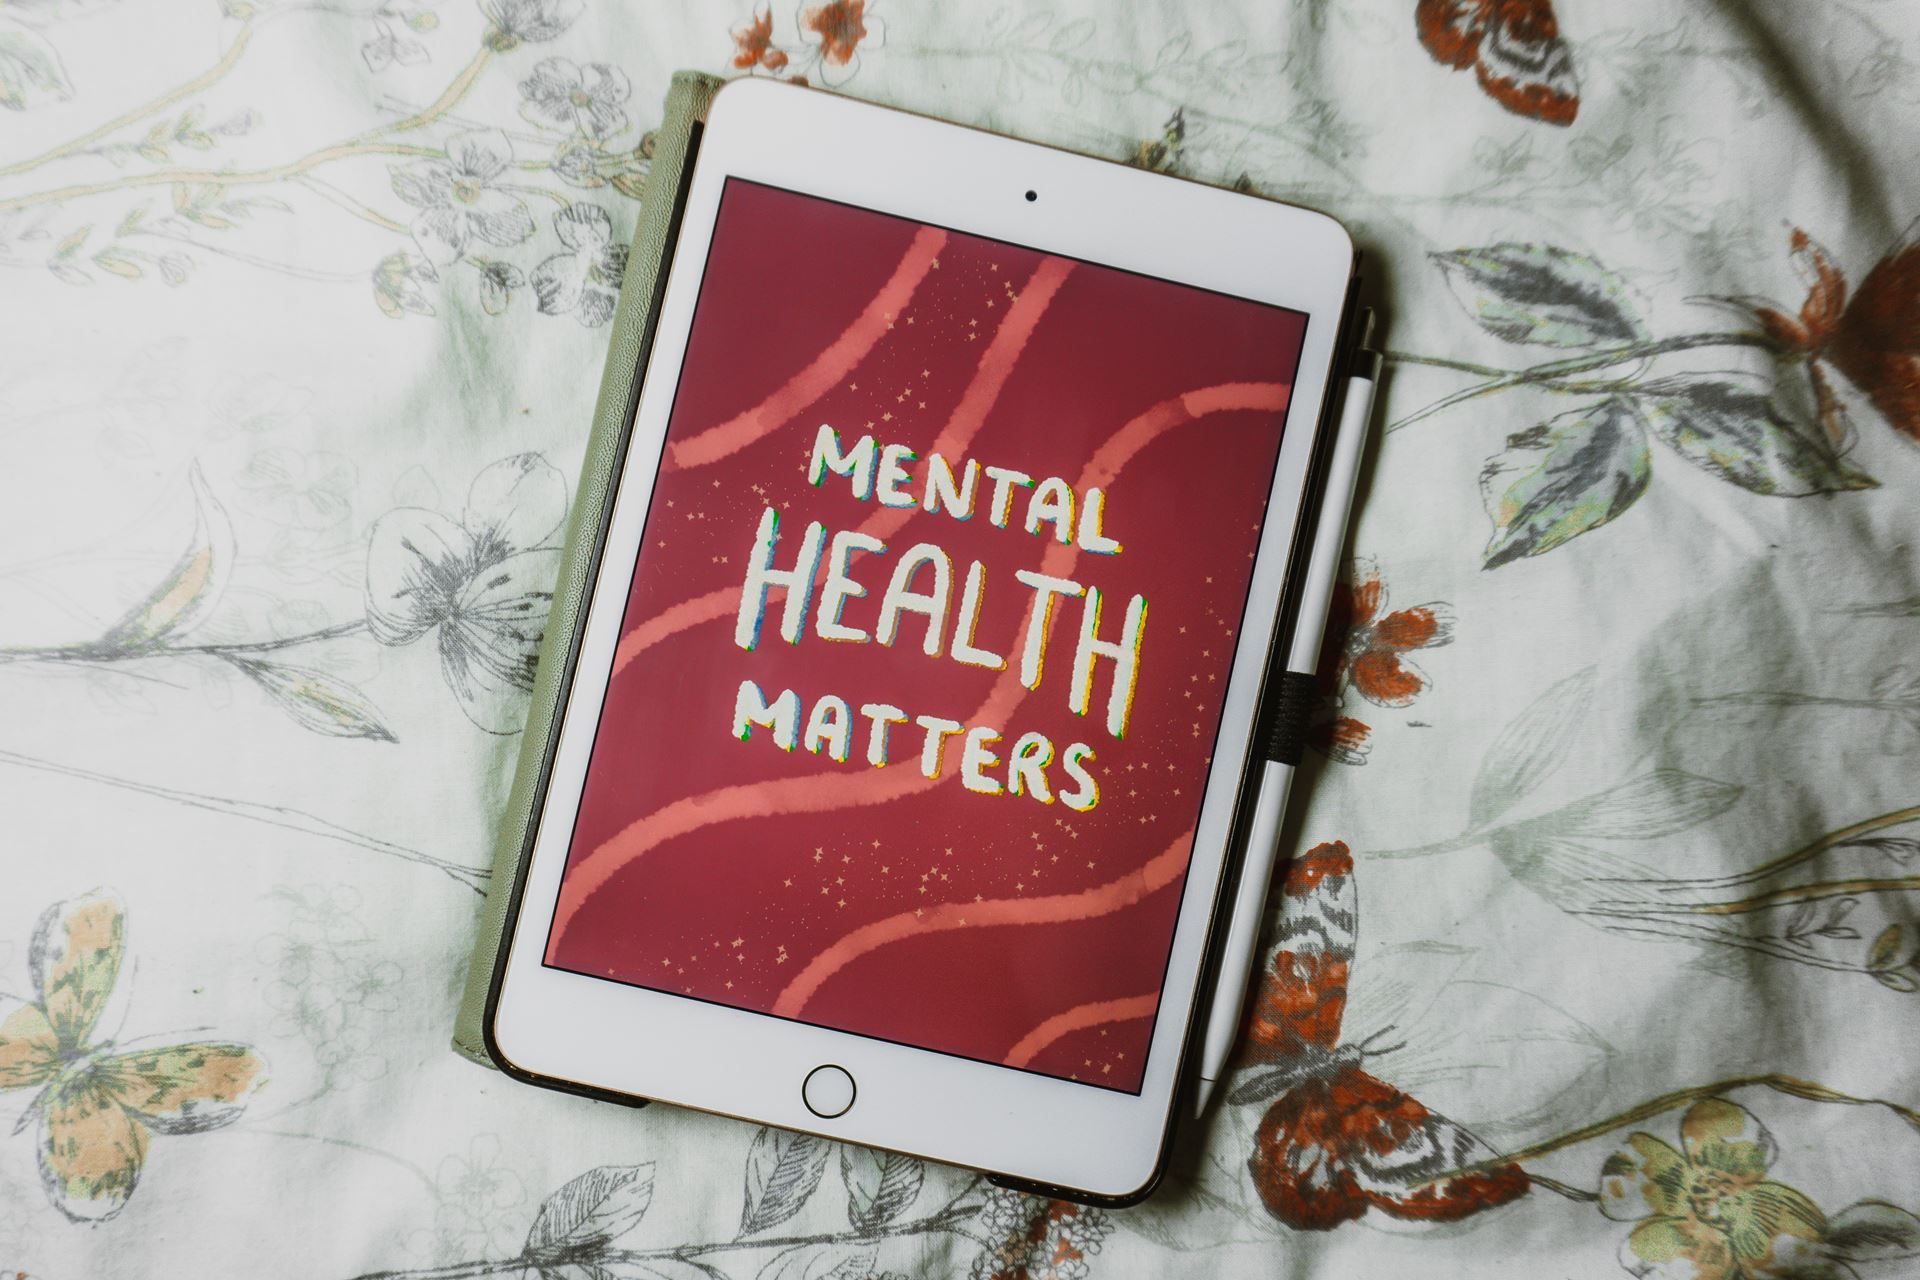 Mental health matters on a screen